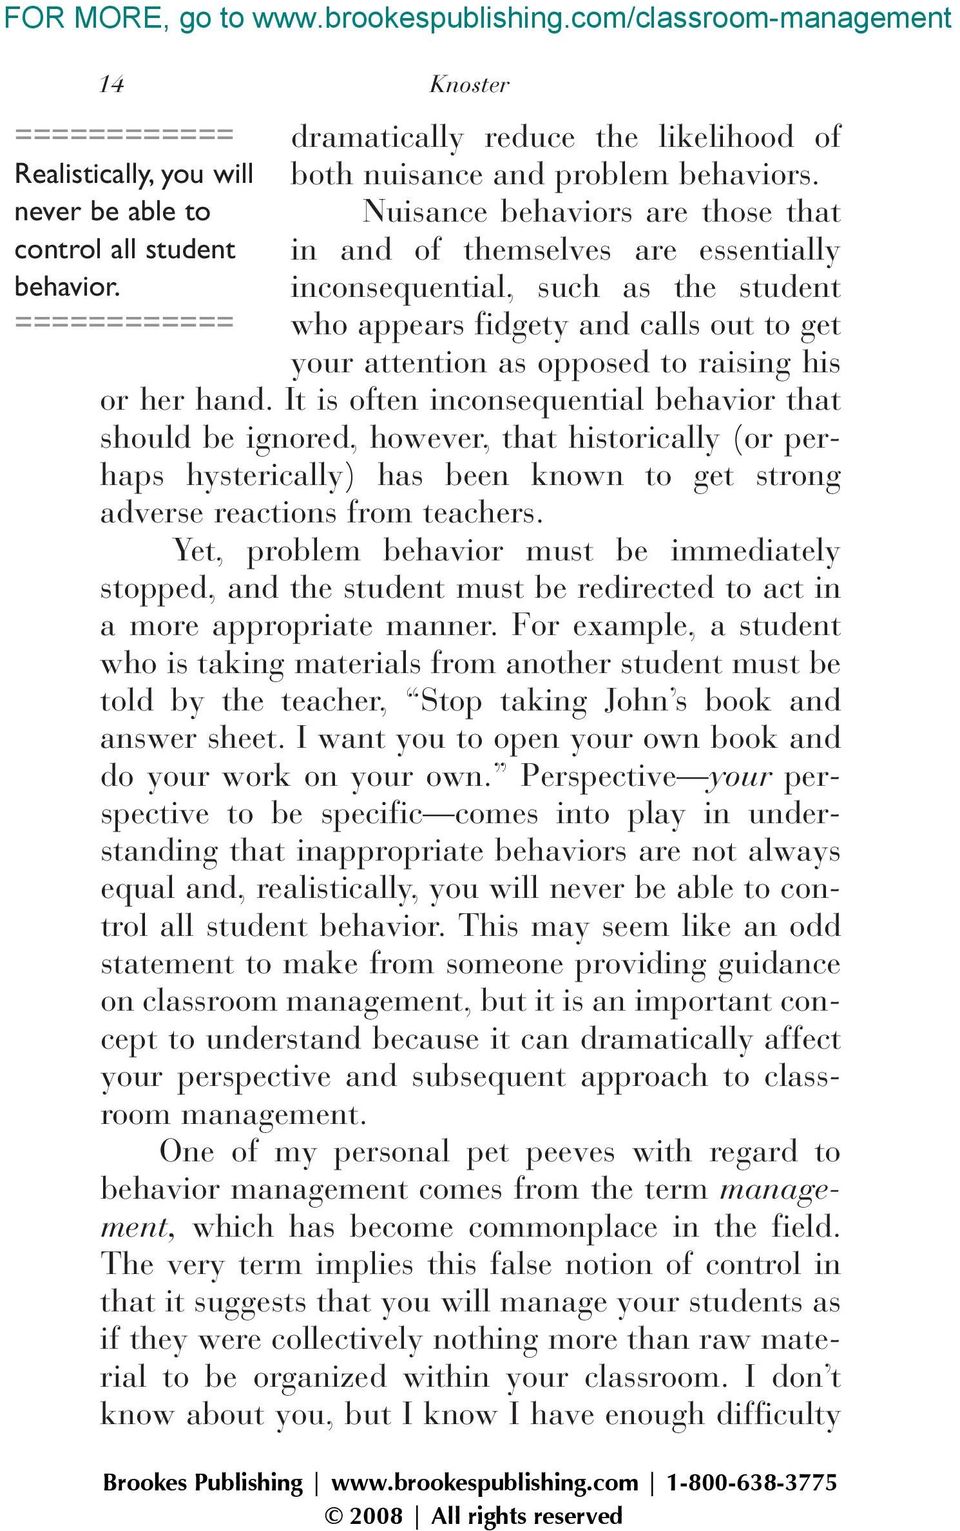 inconsequential, such as the student who appears fidgety and calls out to get your attention as opposed to raising his or her hand.